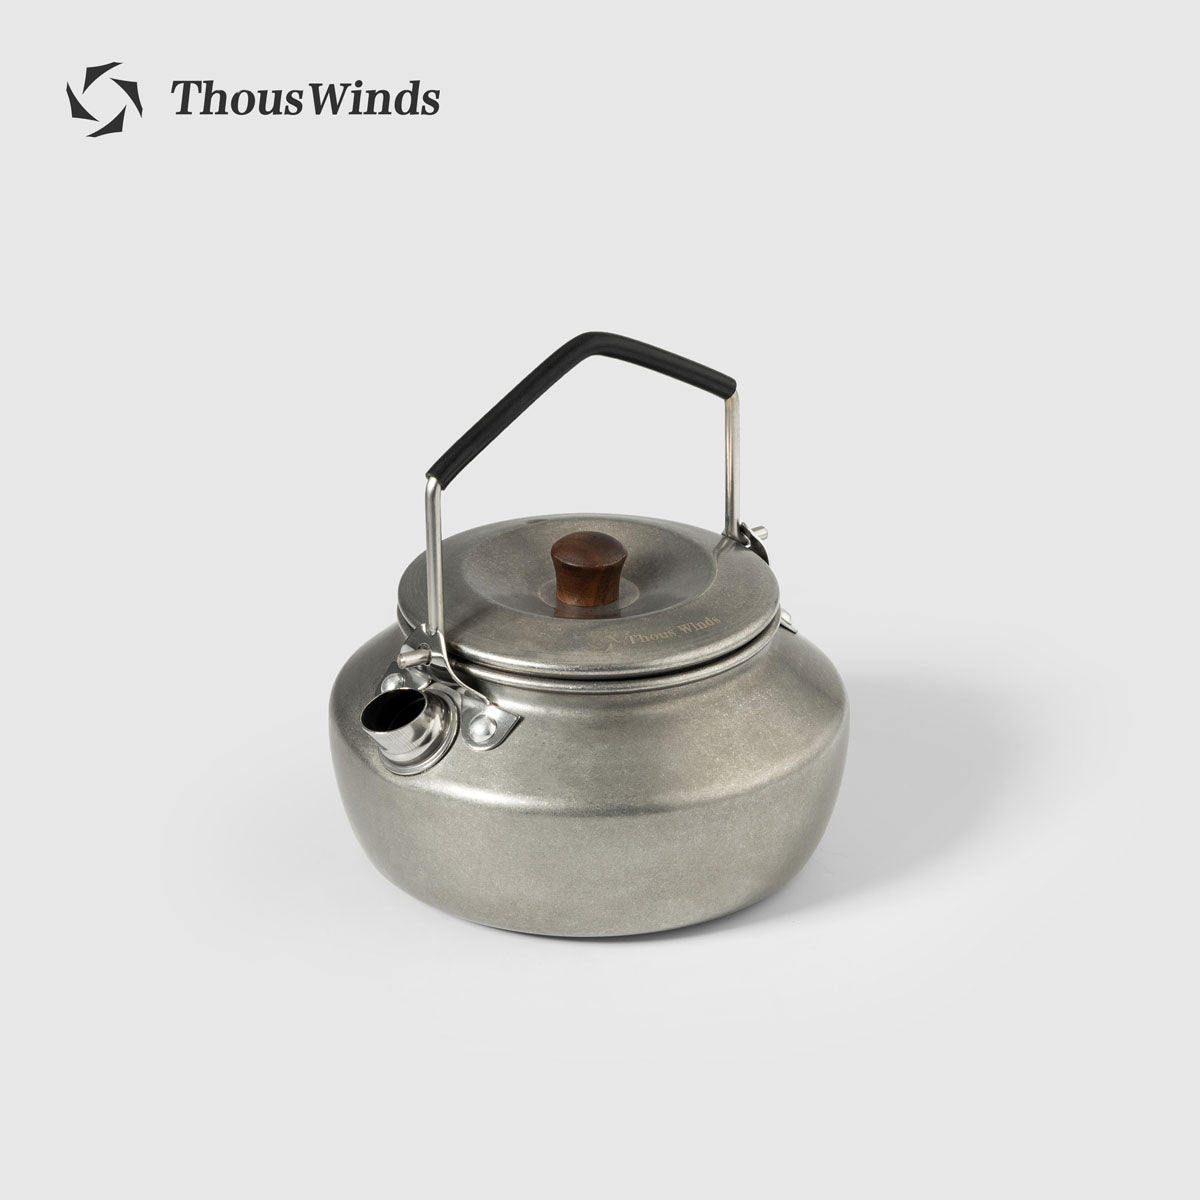 Thous Winds 0.6 Mini Stainless Steel Kettle - Vintage Silver